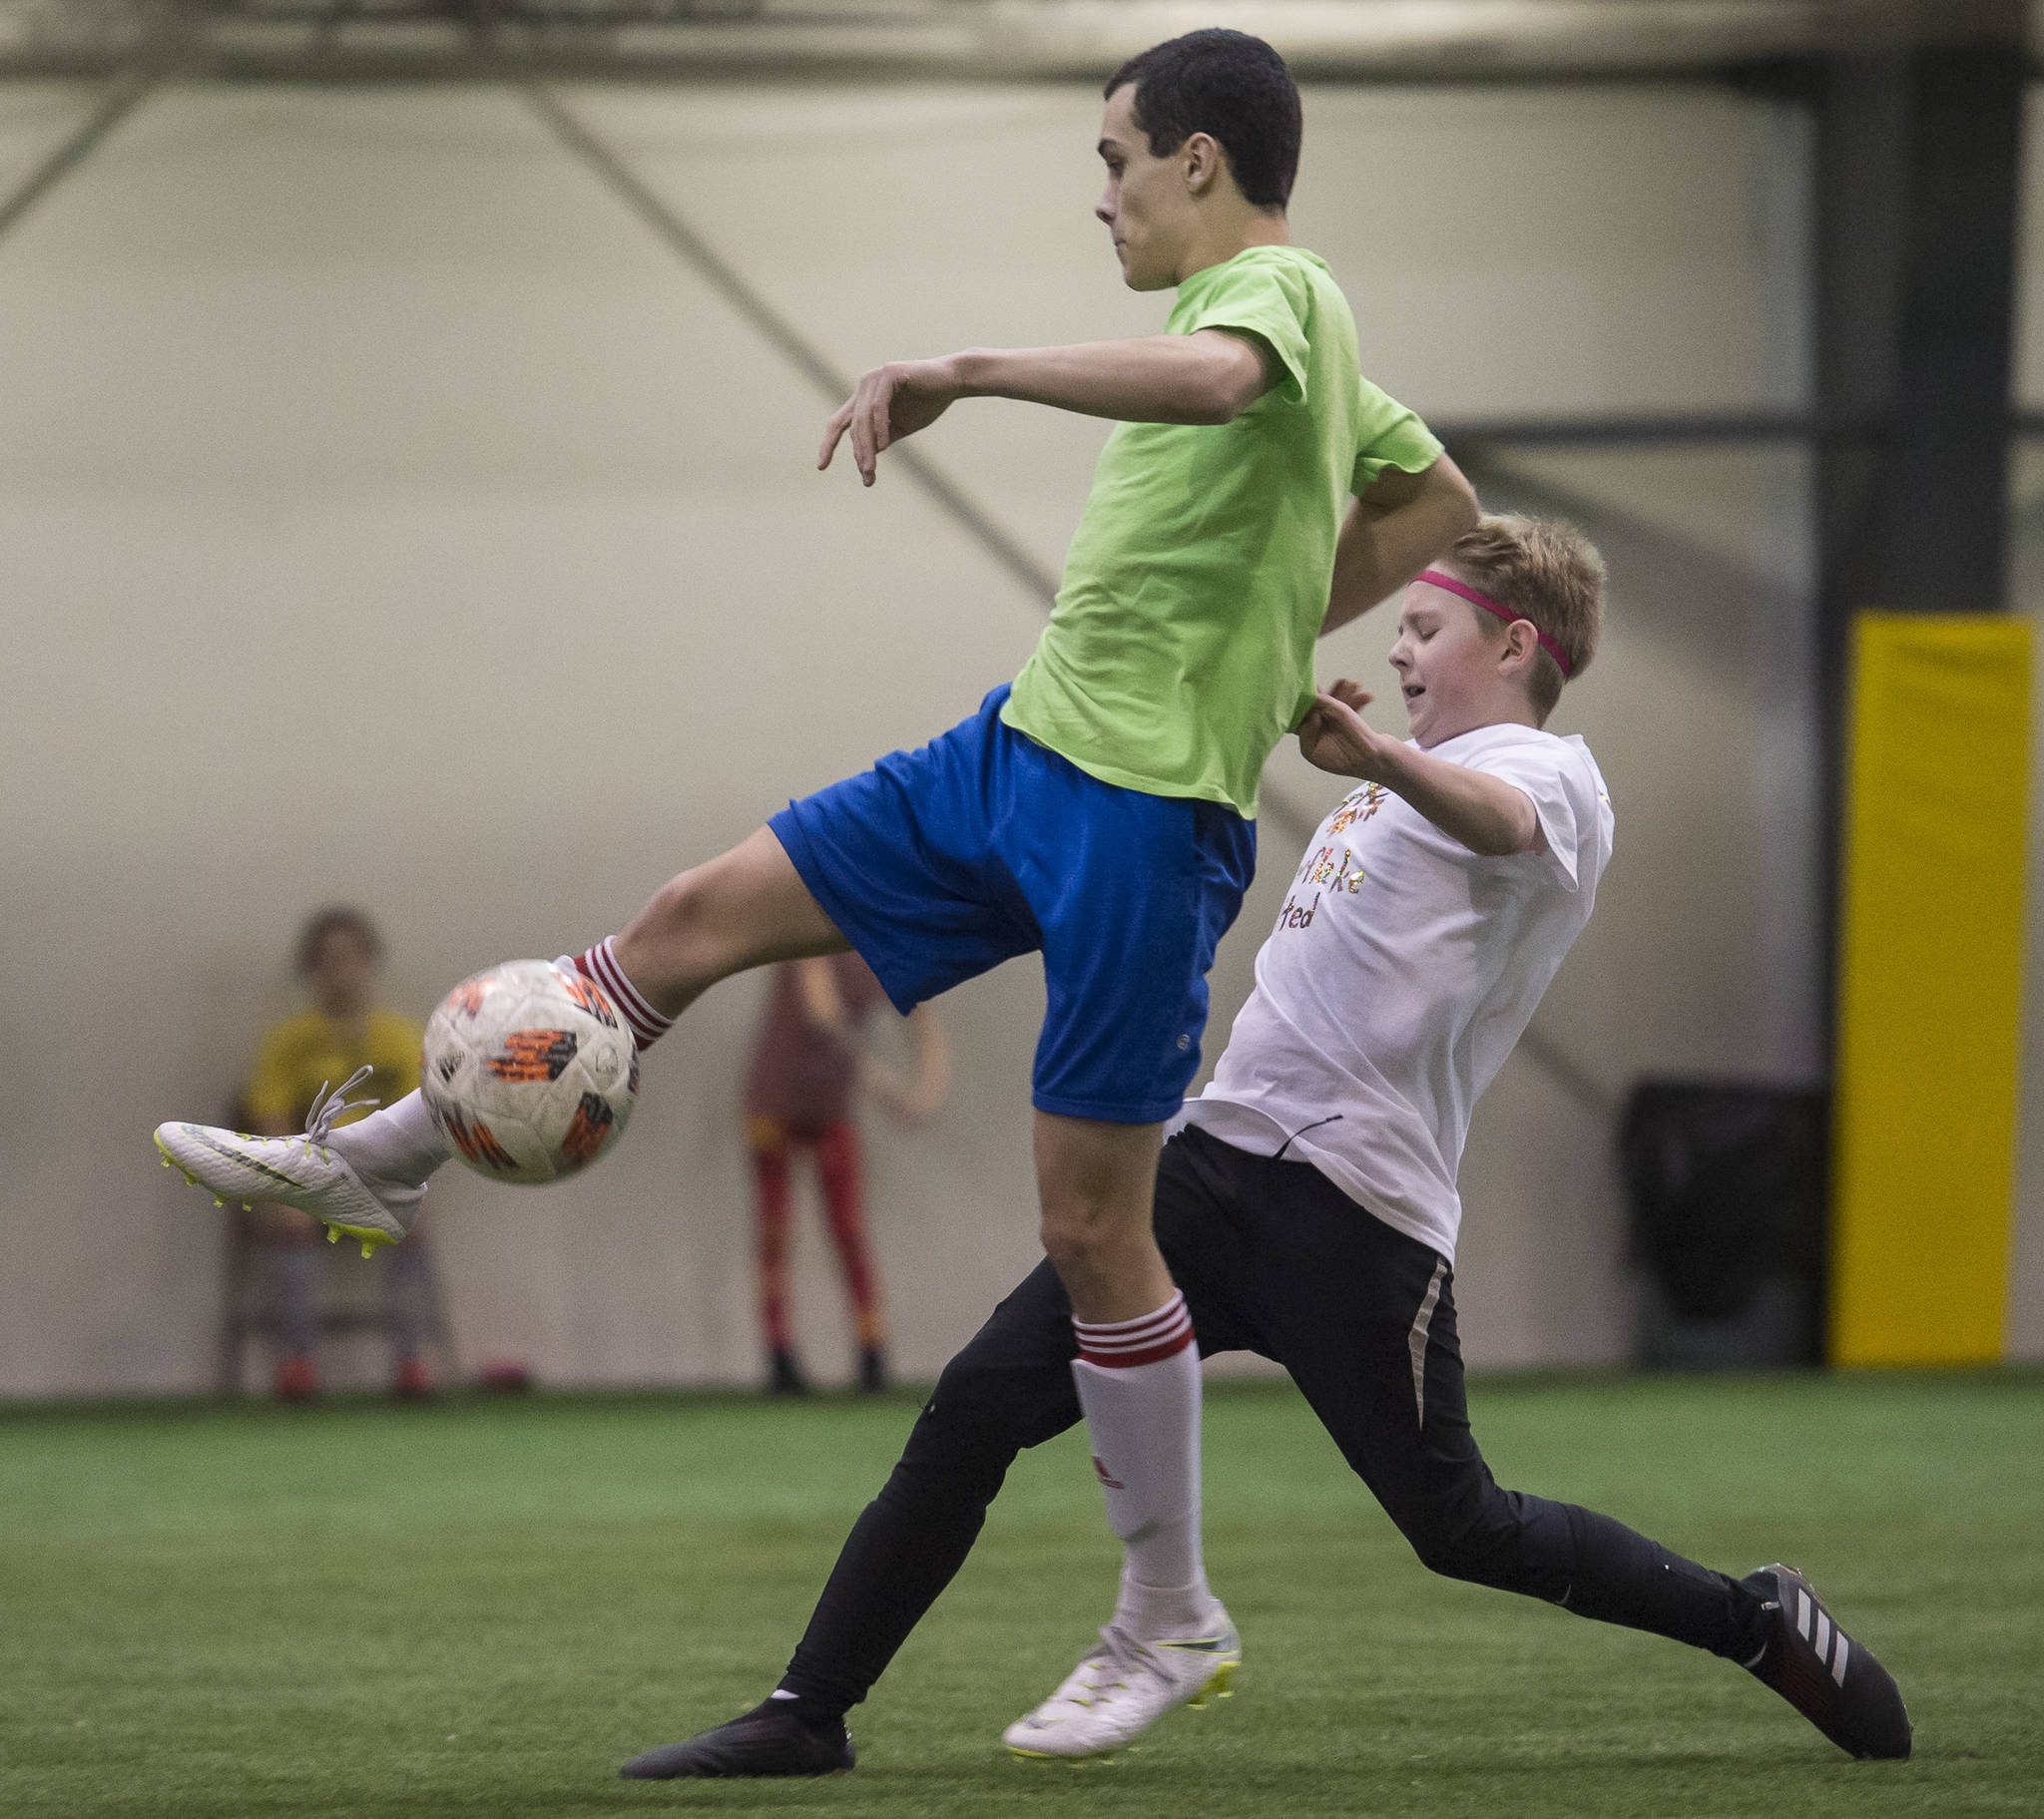 Snowflake United plays against Missile Toes at the annual Holiday Cup Soccer Tournament at the Wells Fargo Dimond Park Field House on Wednesday, Dec. 26, 2018. (Michael Penn | Juneau Empire)